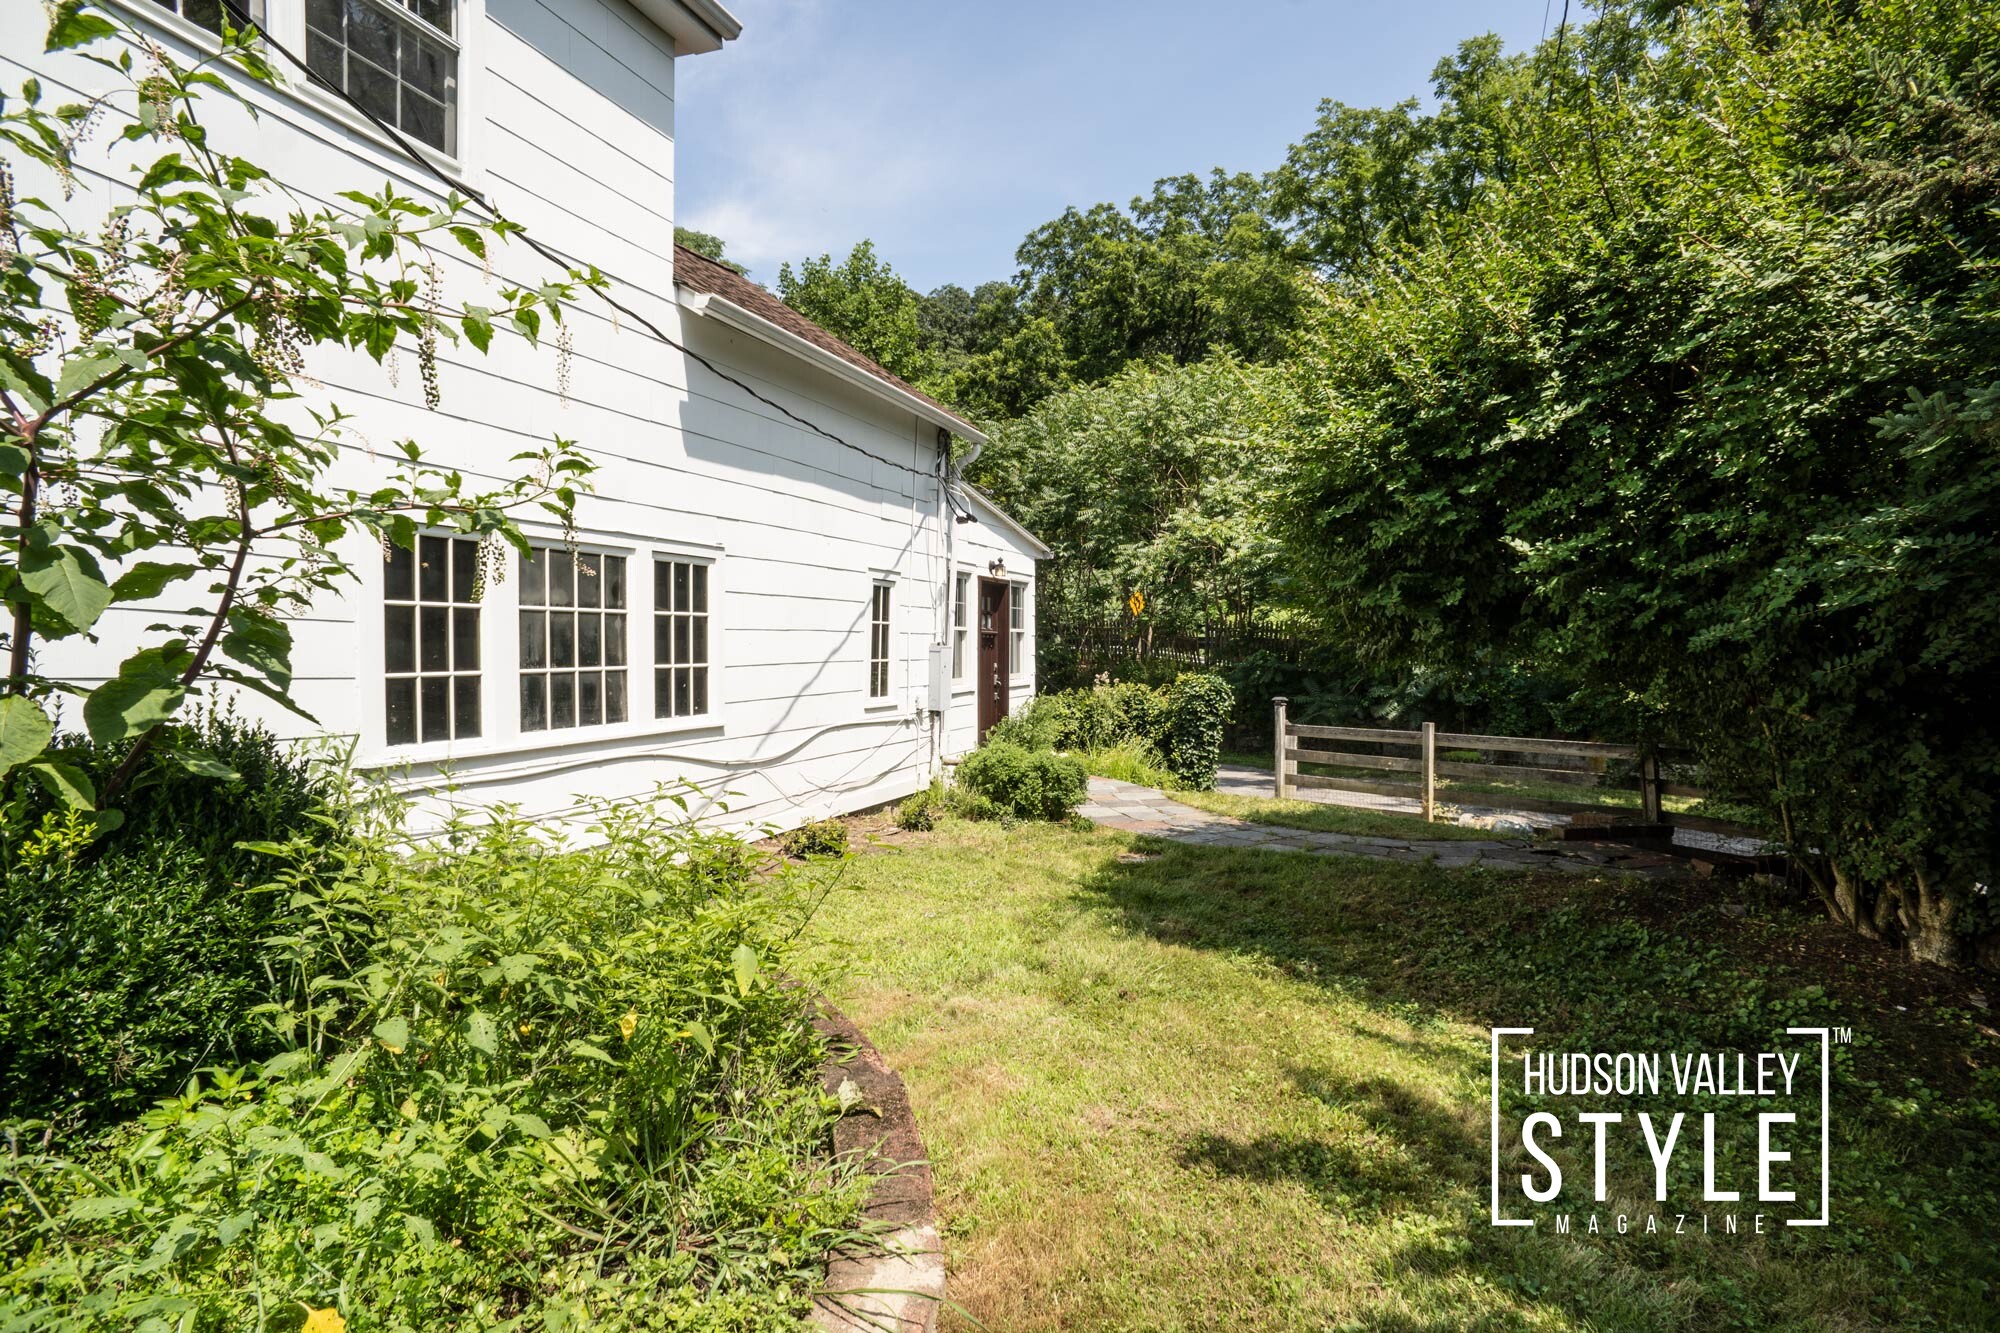 Farmhouse in Garrison, NY – Real Estate Photography Project by Duncan Avenue Studios – Best Real Estate Photographer in Hudson Valley, Catskills, and Westchester, New York